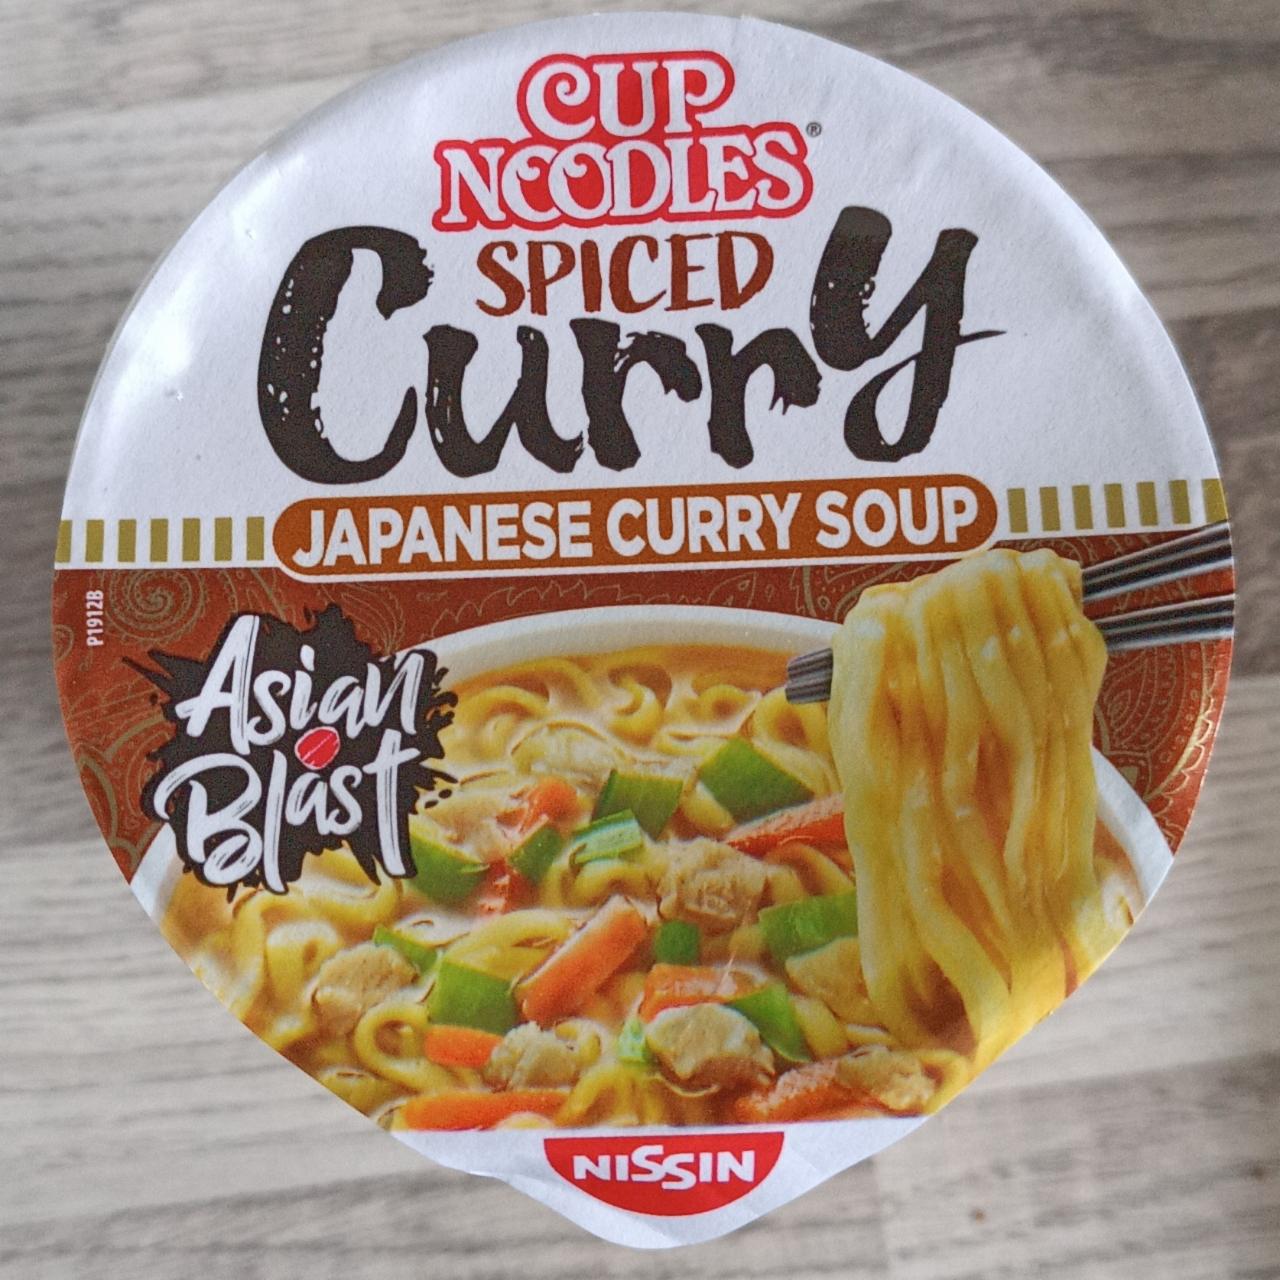 Fotografie - Cup Noodles Spiced Curry Japanese Curry Soup Nissin